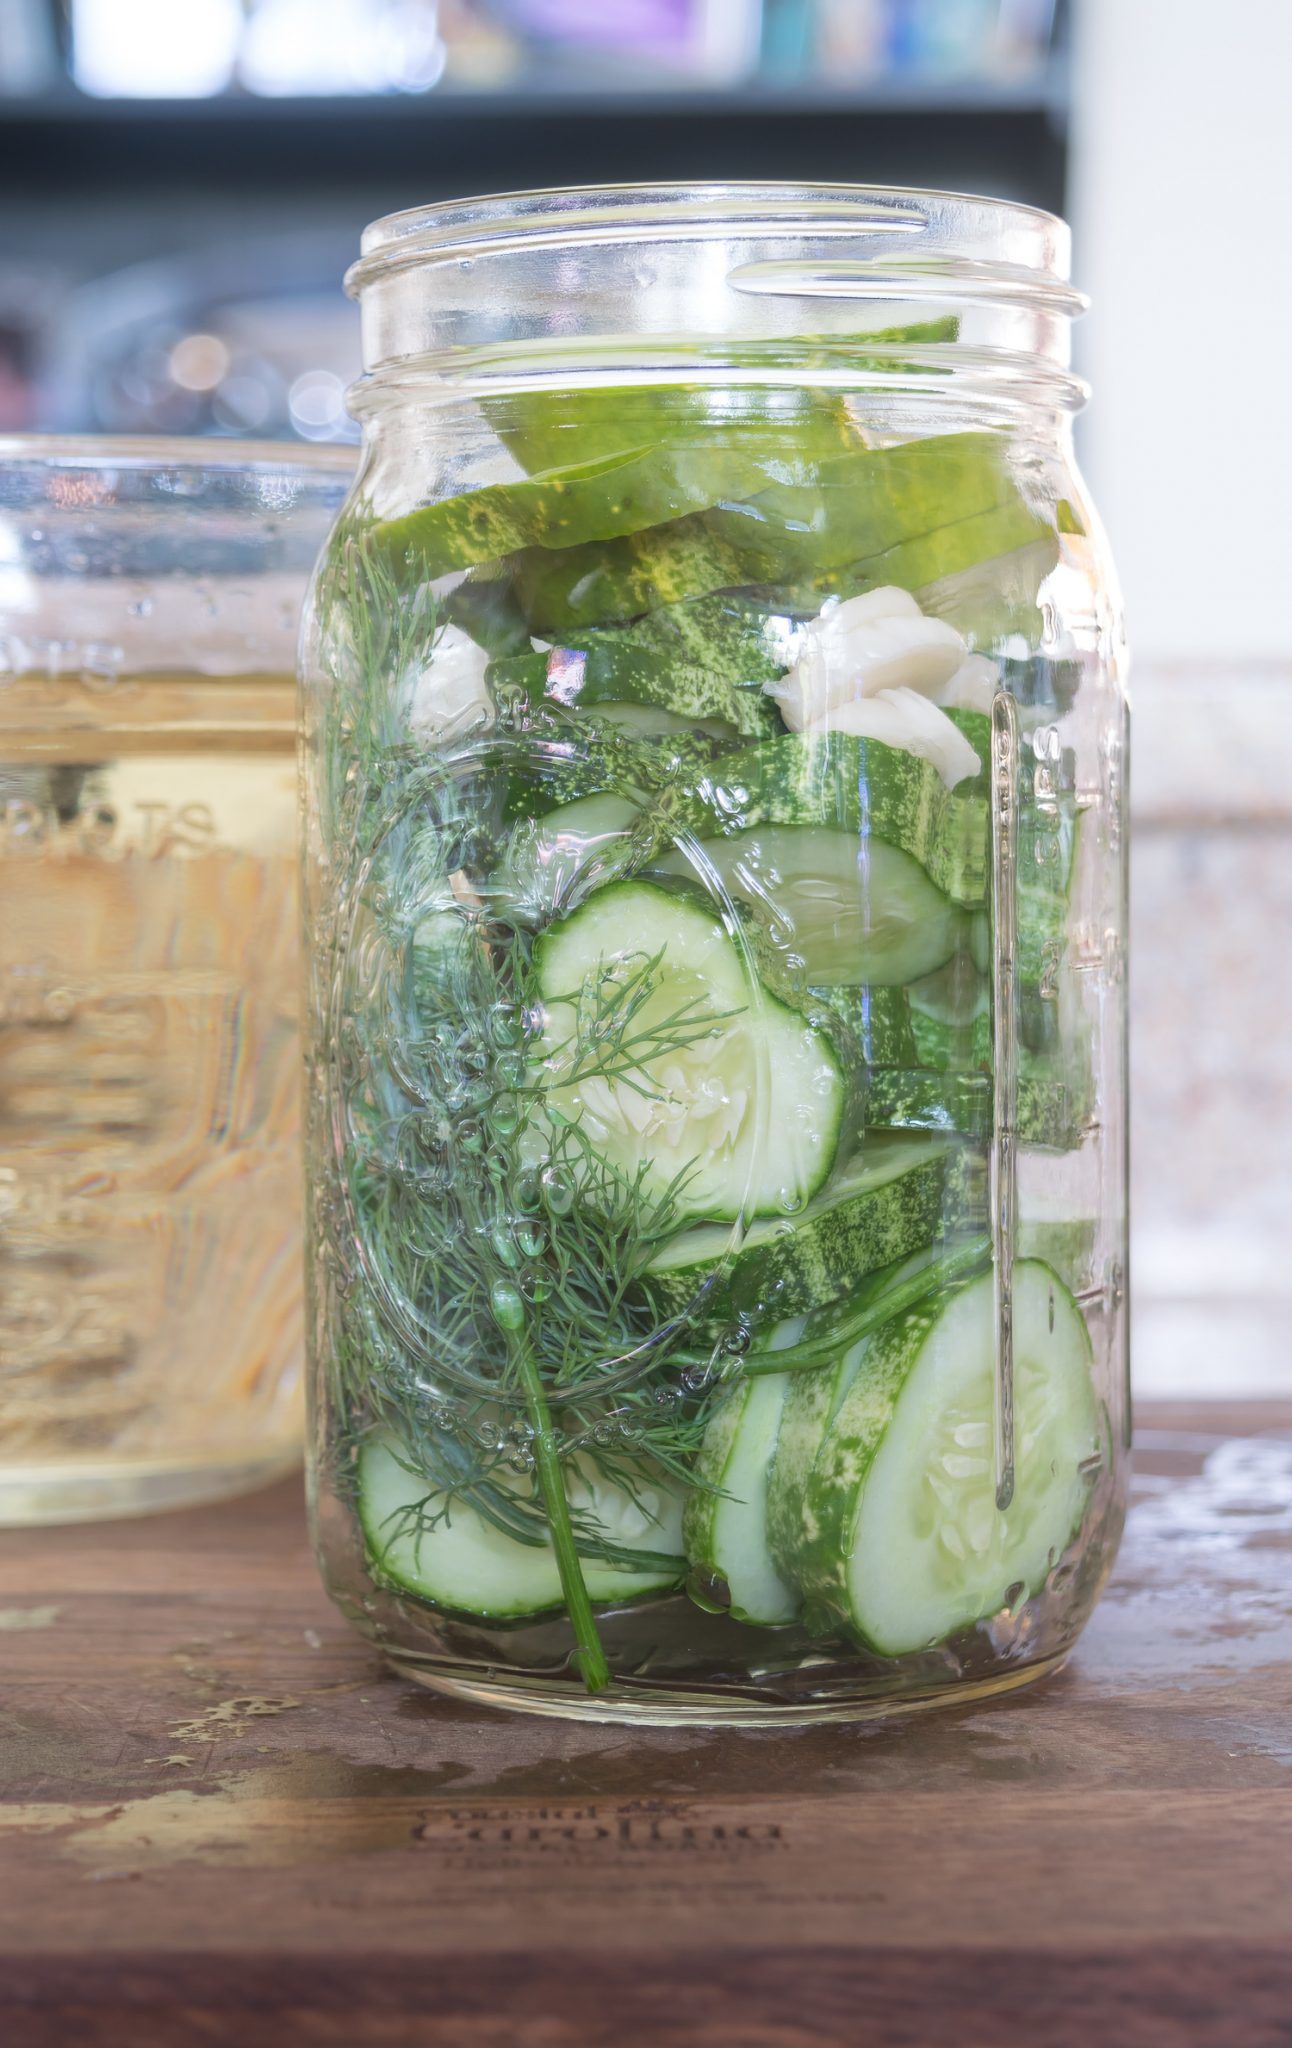 Refrigerator Dill Pickle Recipe: sliced cukes and dill in jar ready for brining